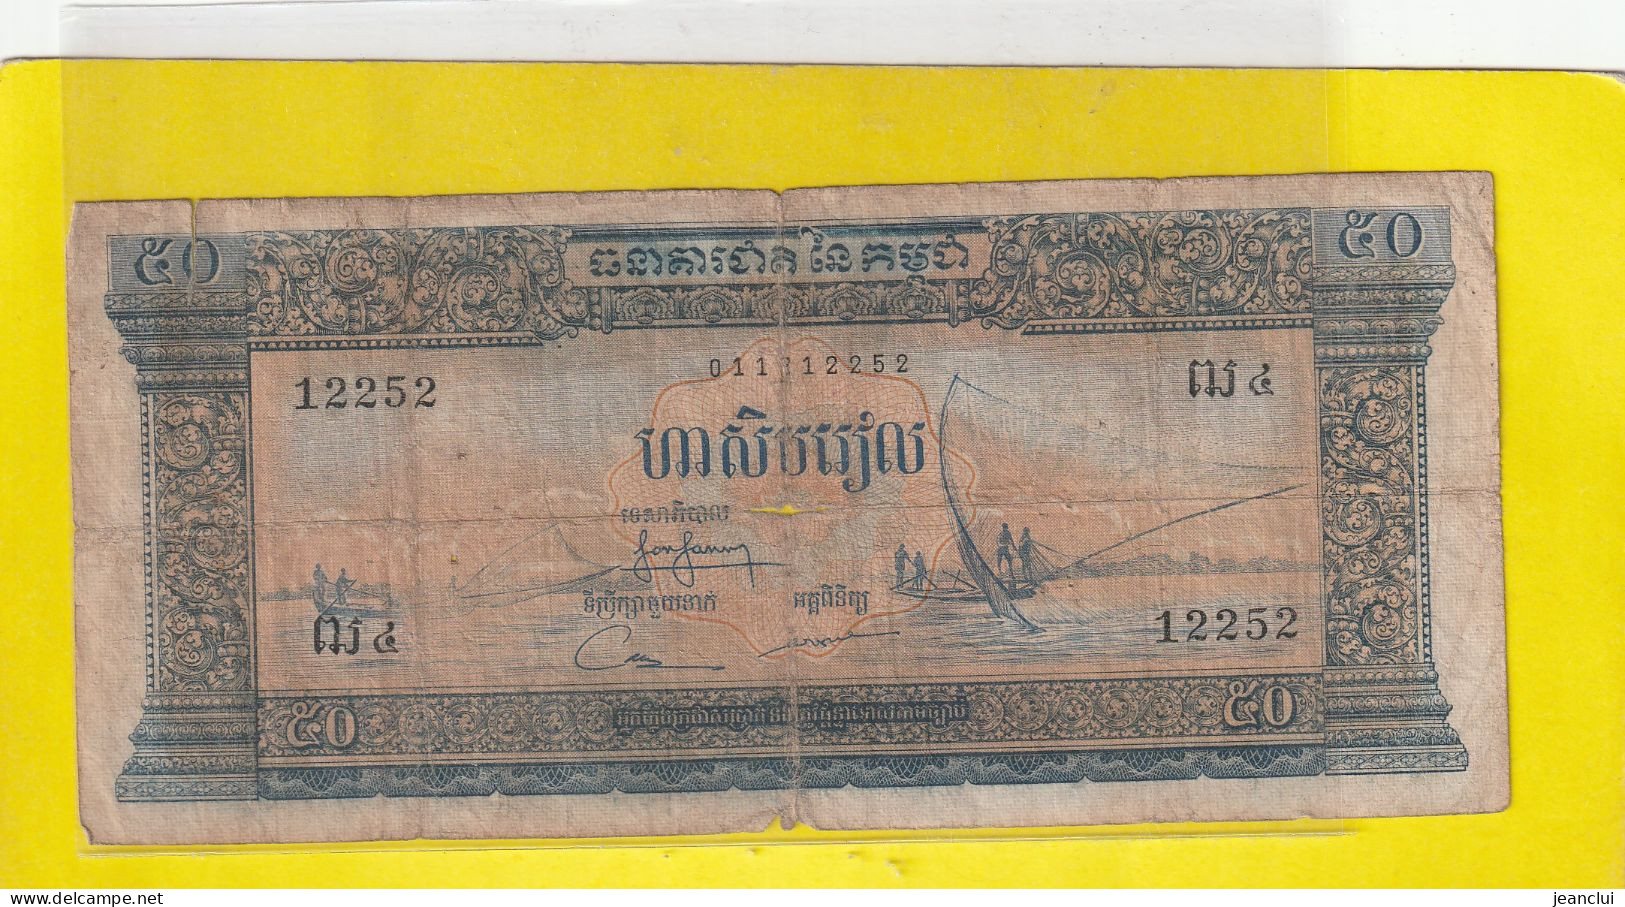 BANQUE NATIONALE DU CAMBODGE  .  50 RIELS    . N°  12252  ( 5 NUMBERS )  .  BILLET USITE  .  2 SCANNES - Cambodia